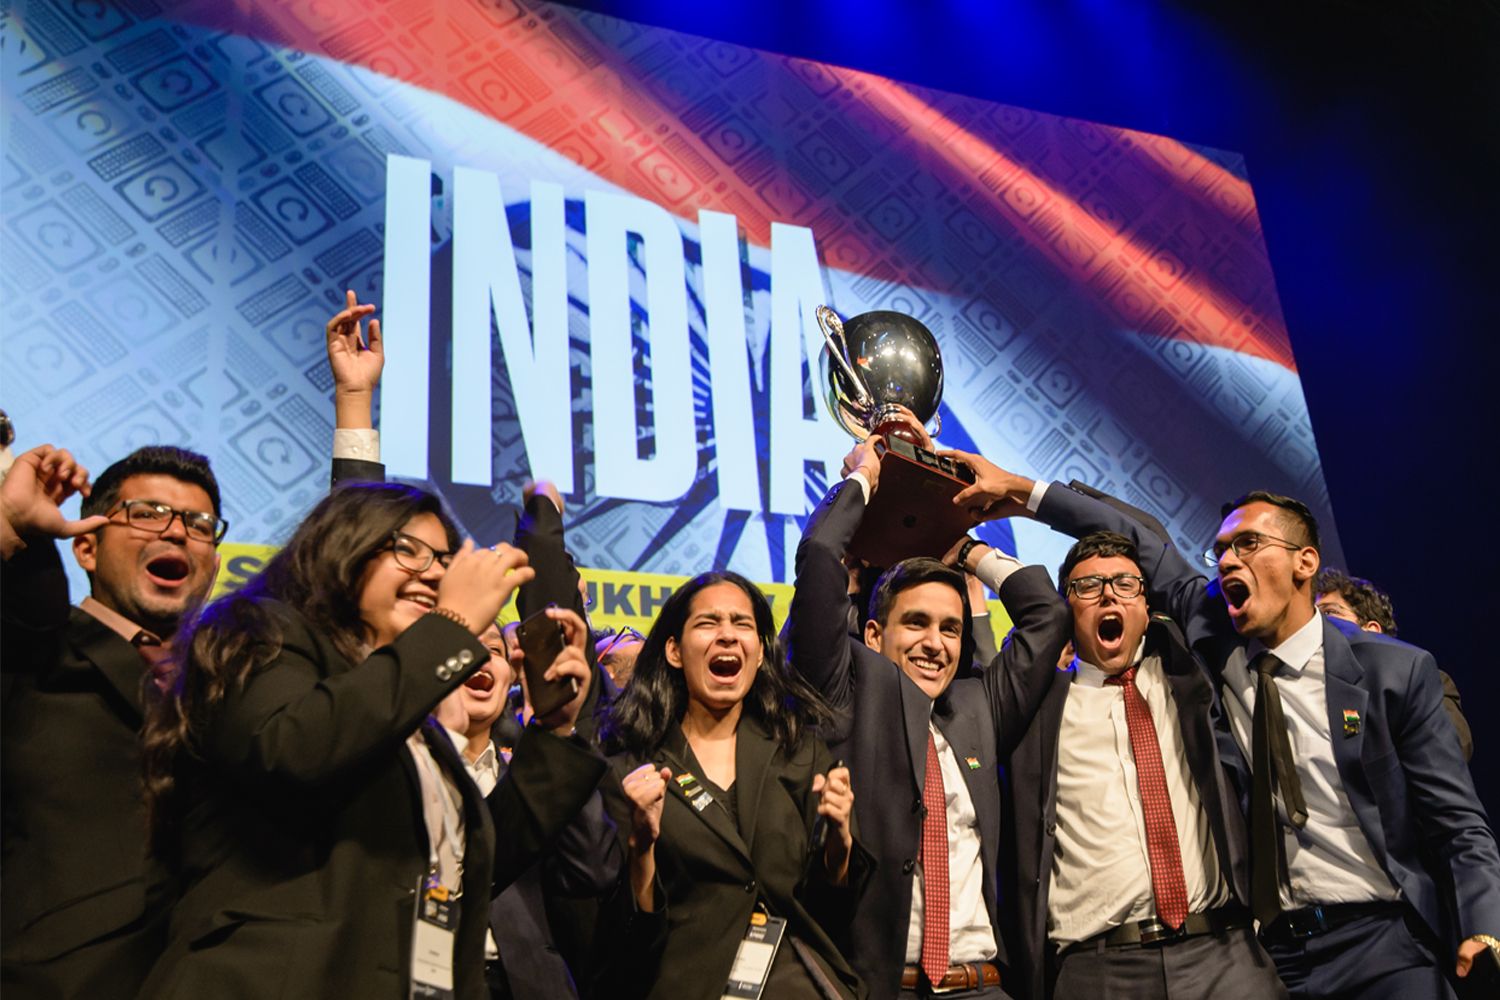 Students wearing business suits and holding trophy in front of India banner